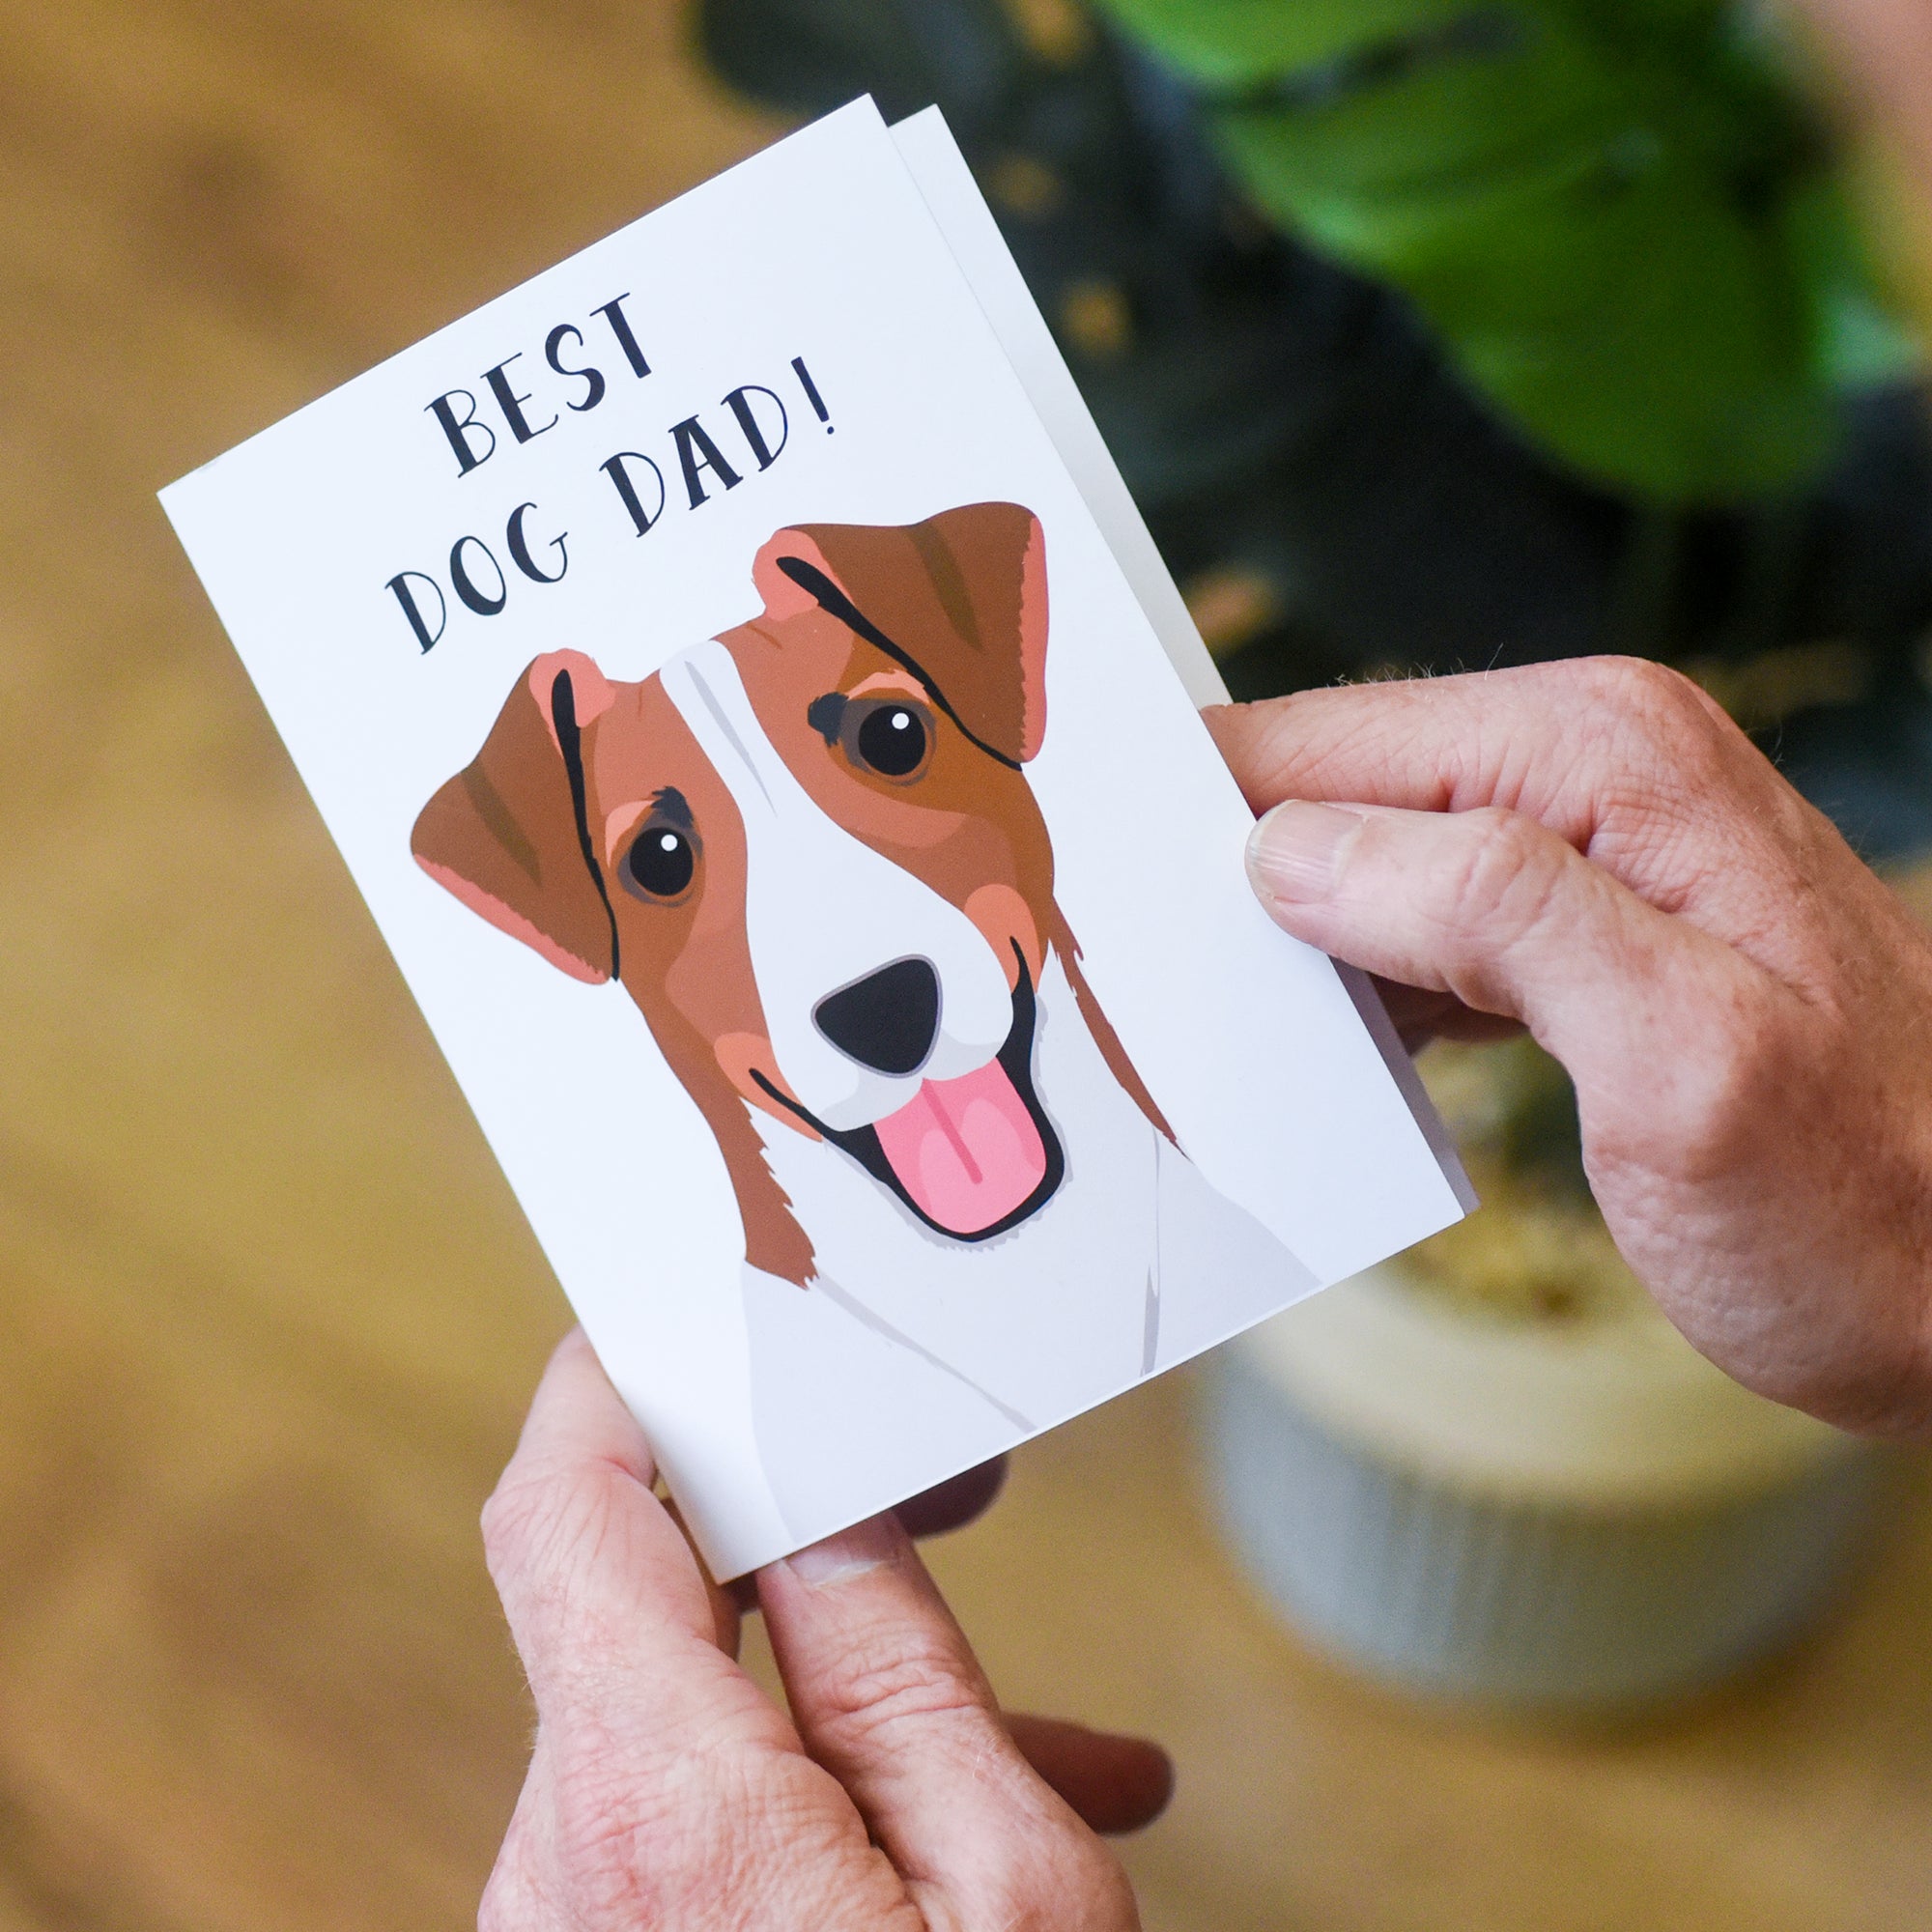 Best Dog Dad! Personalised Greetings Card from the Dog